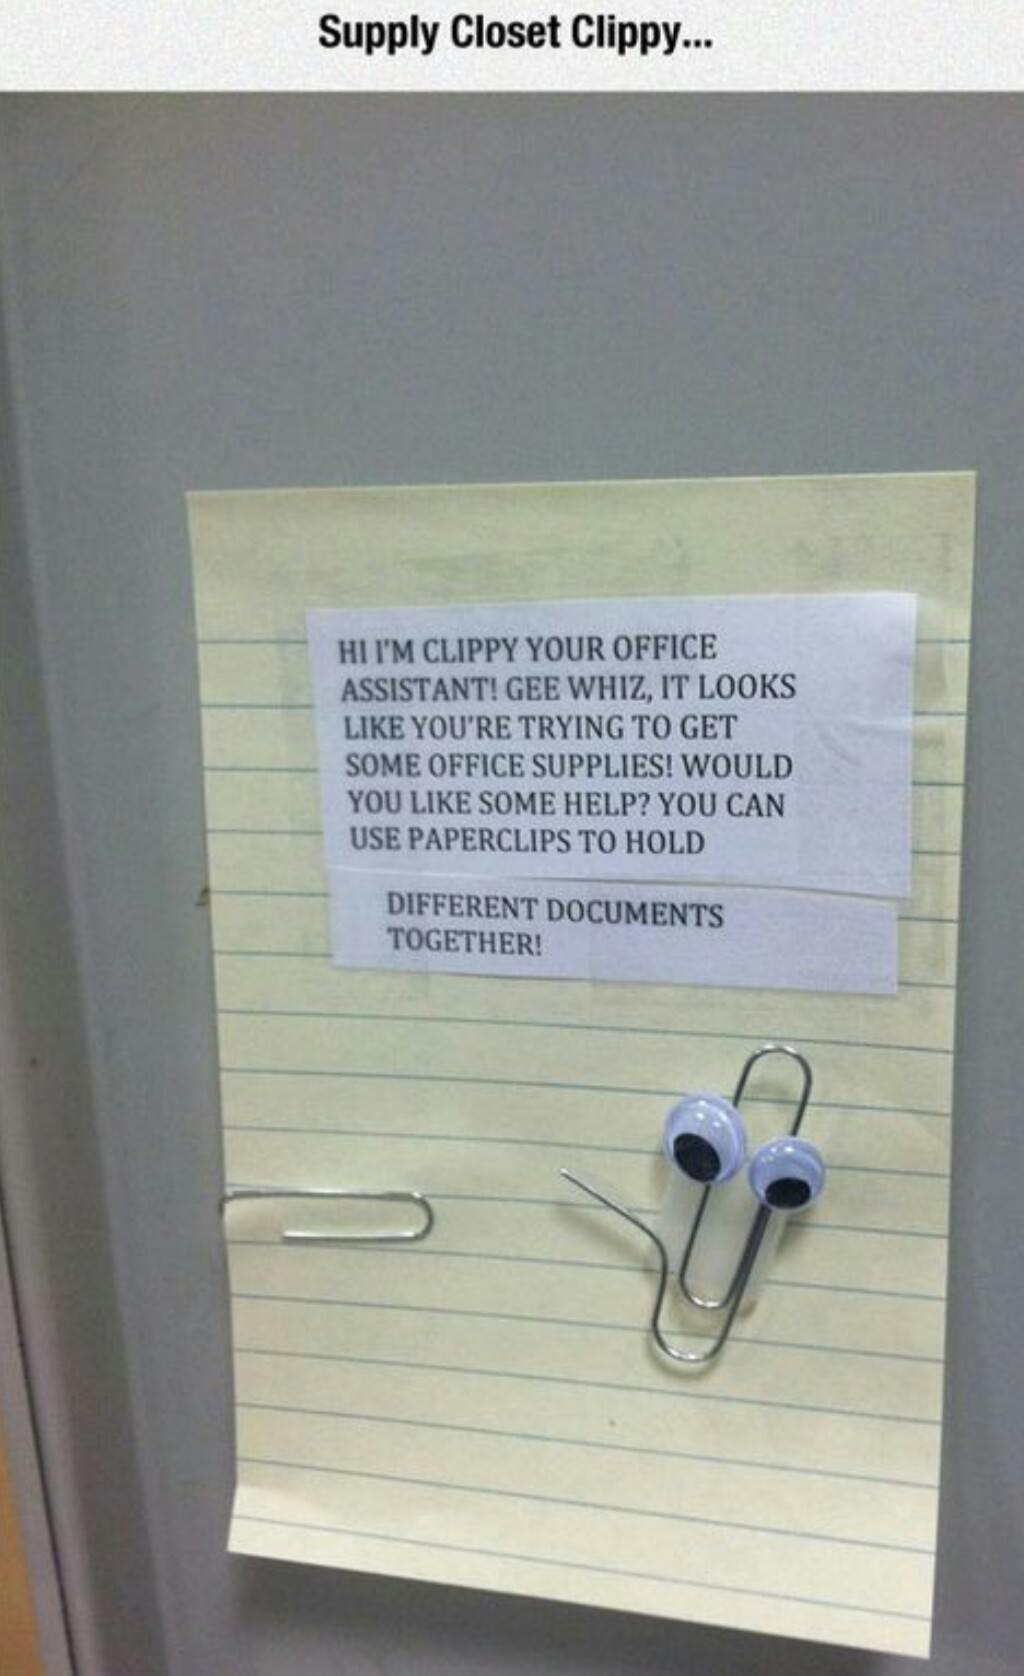 Cool April Fools Pranks That's Both Nostalgic And Harmless For The Office